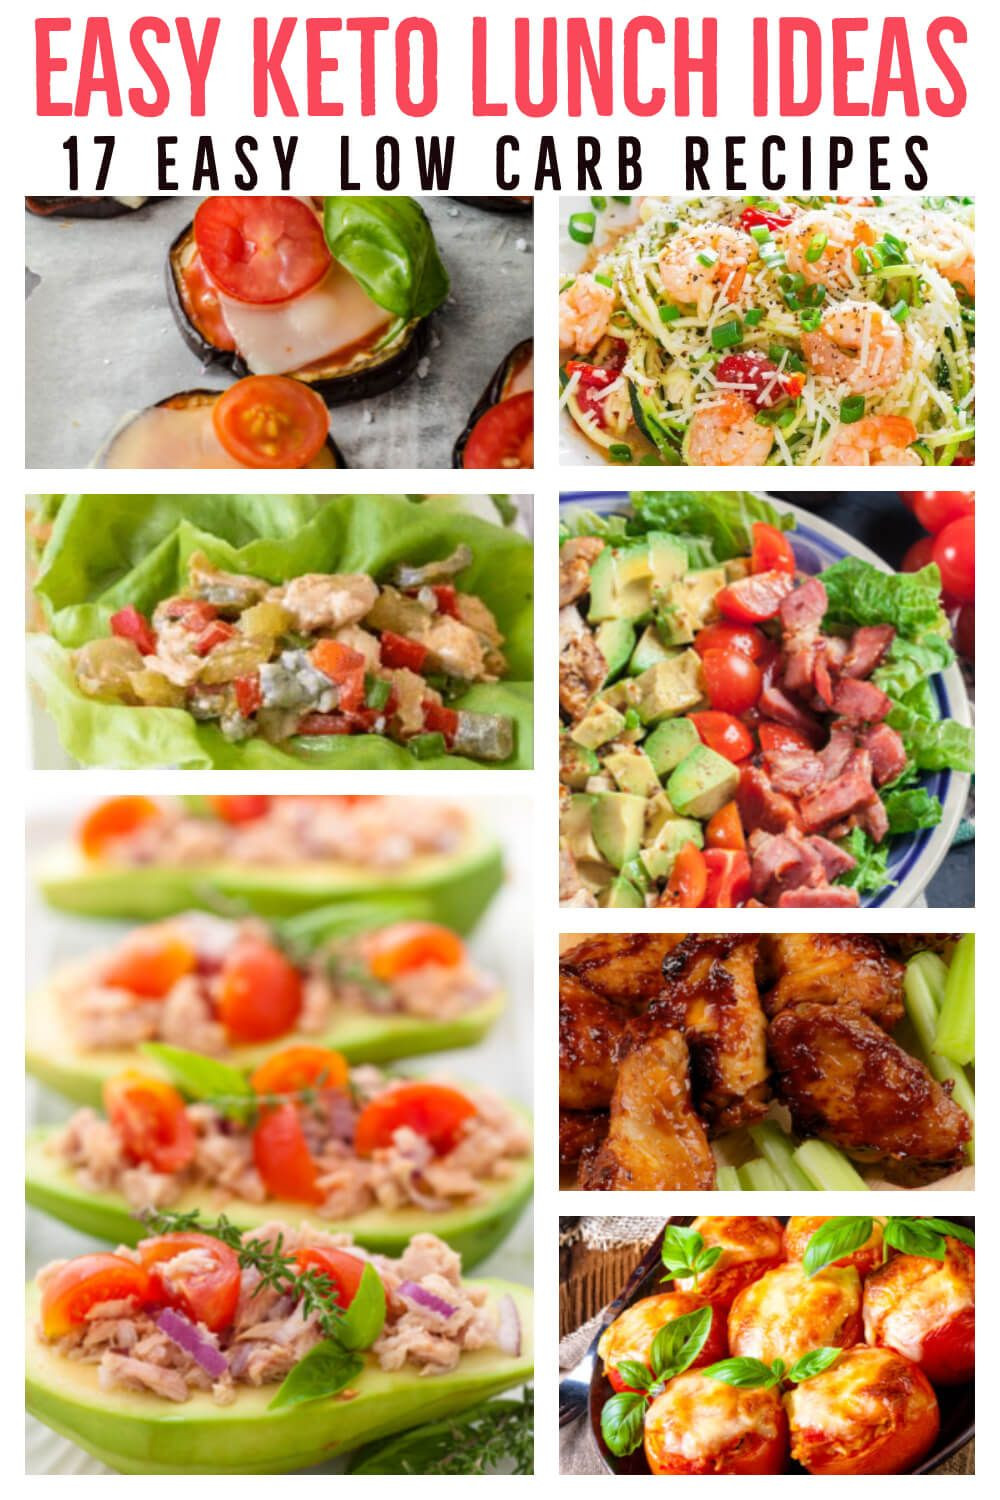 Vegetarian Keto Lunches For Work
 21 Easy Keto Lunch Ideas